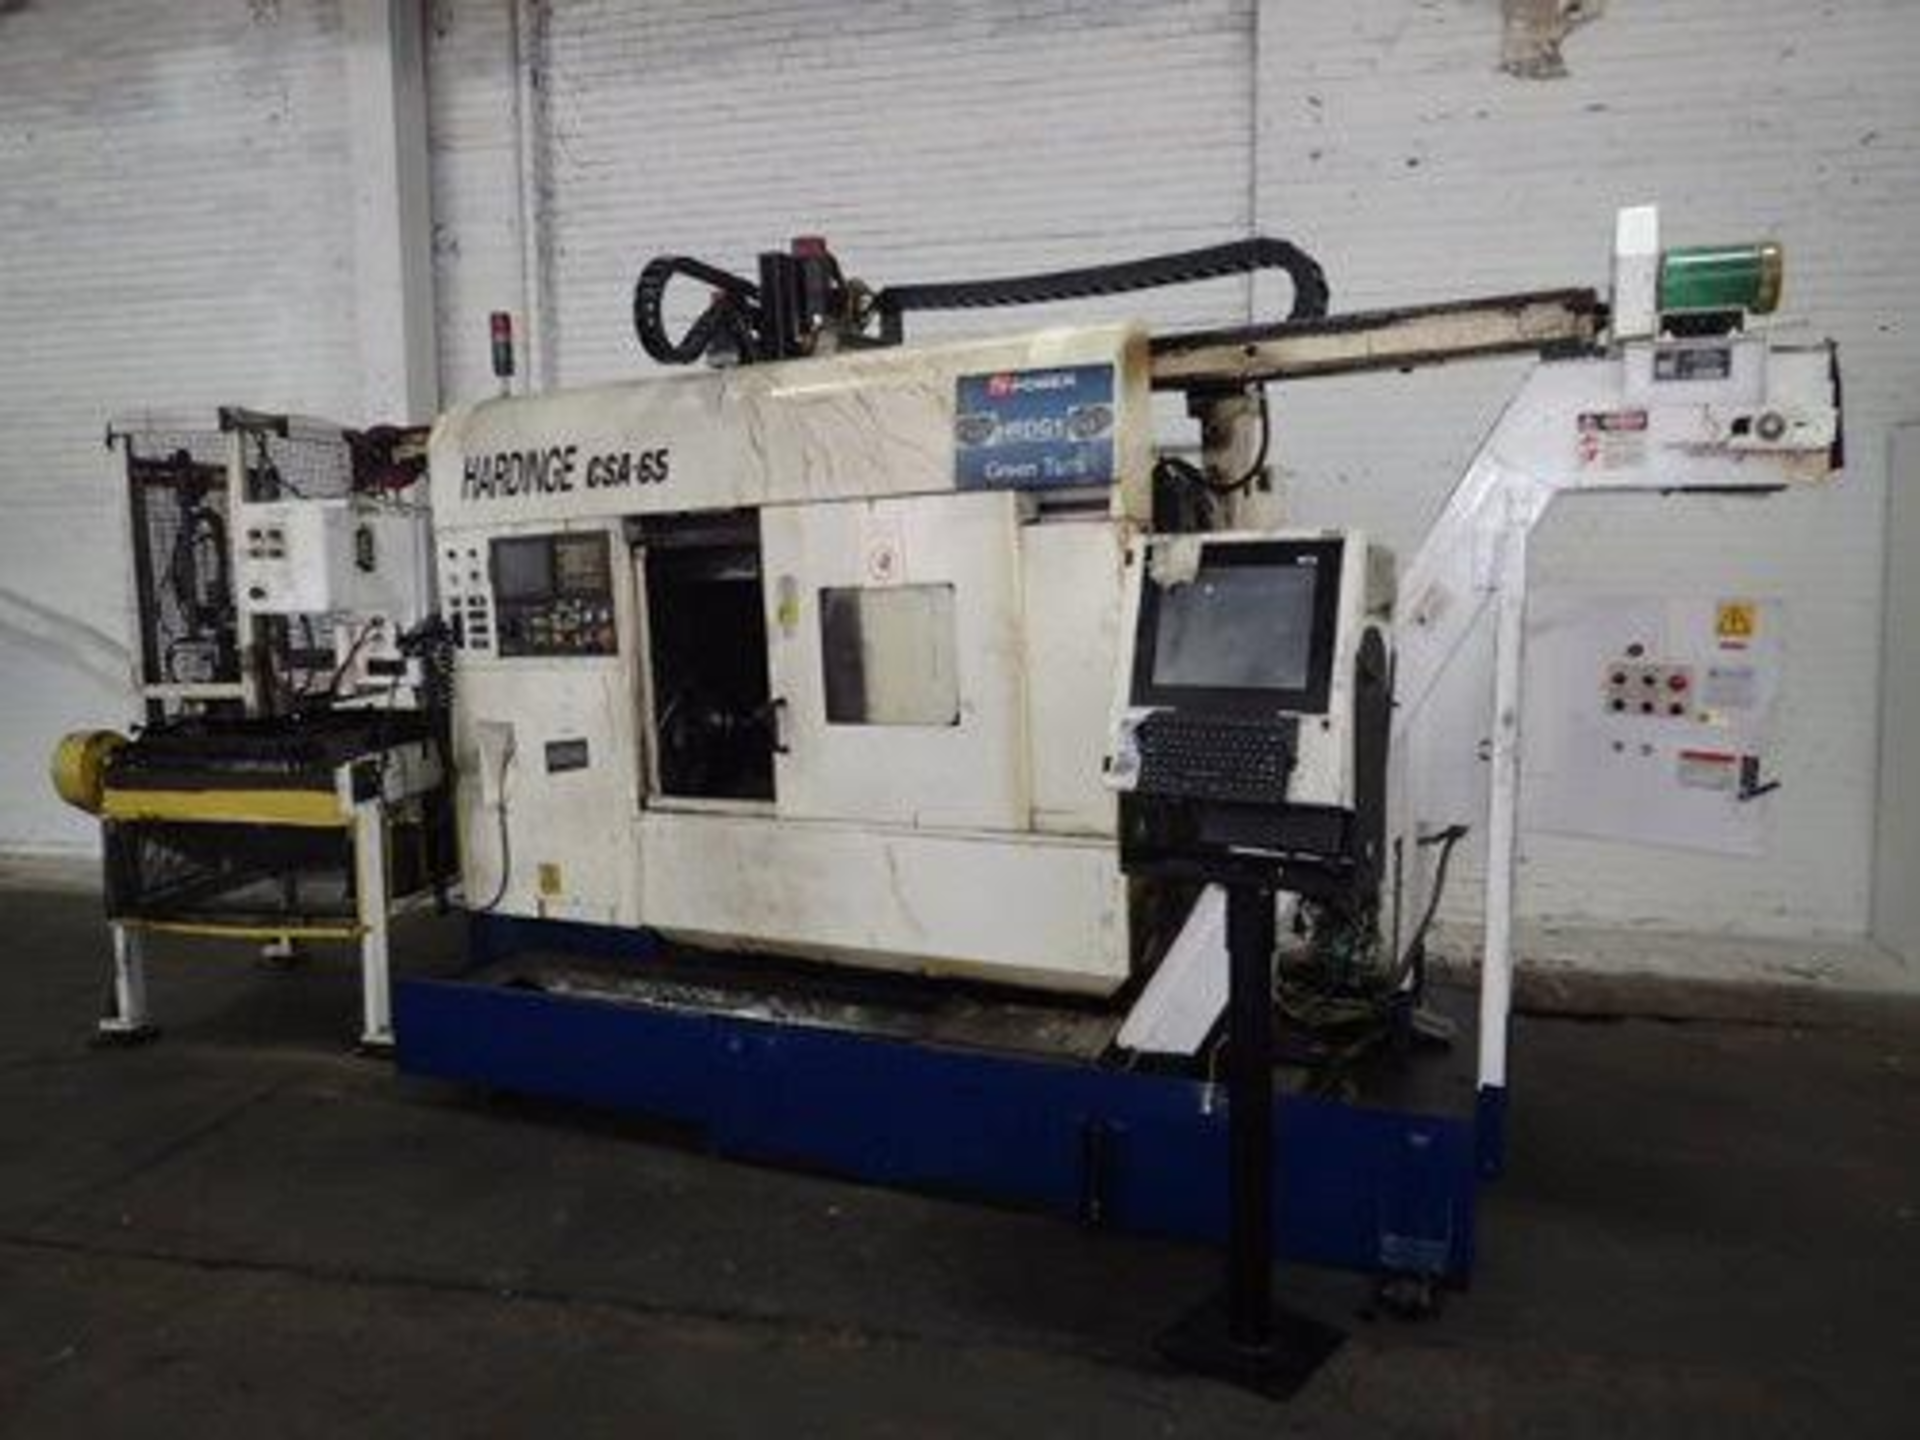 HARDINGE MODEL CSA 65 CNC LATHE WITH LOADER, 1999, LOCATION MI, BUYER TO LOAD AND SHIP